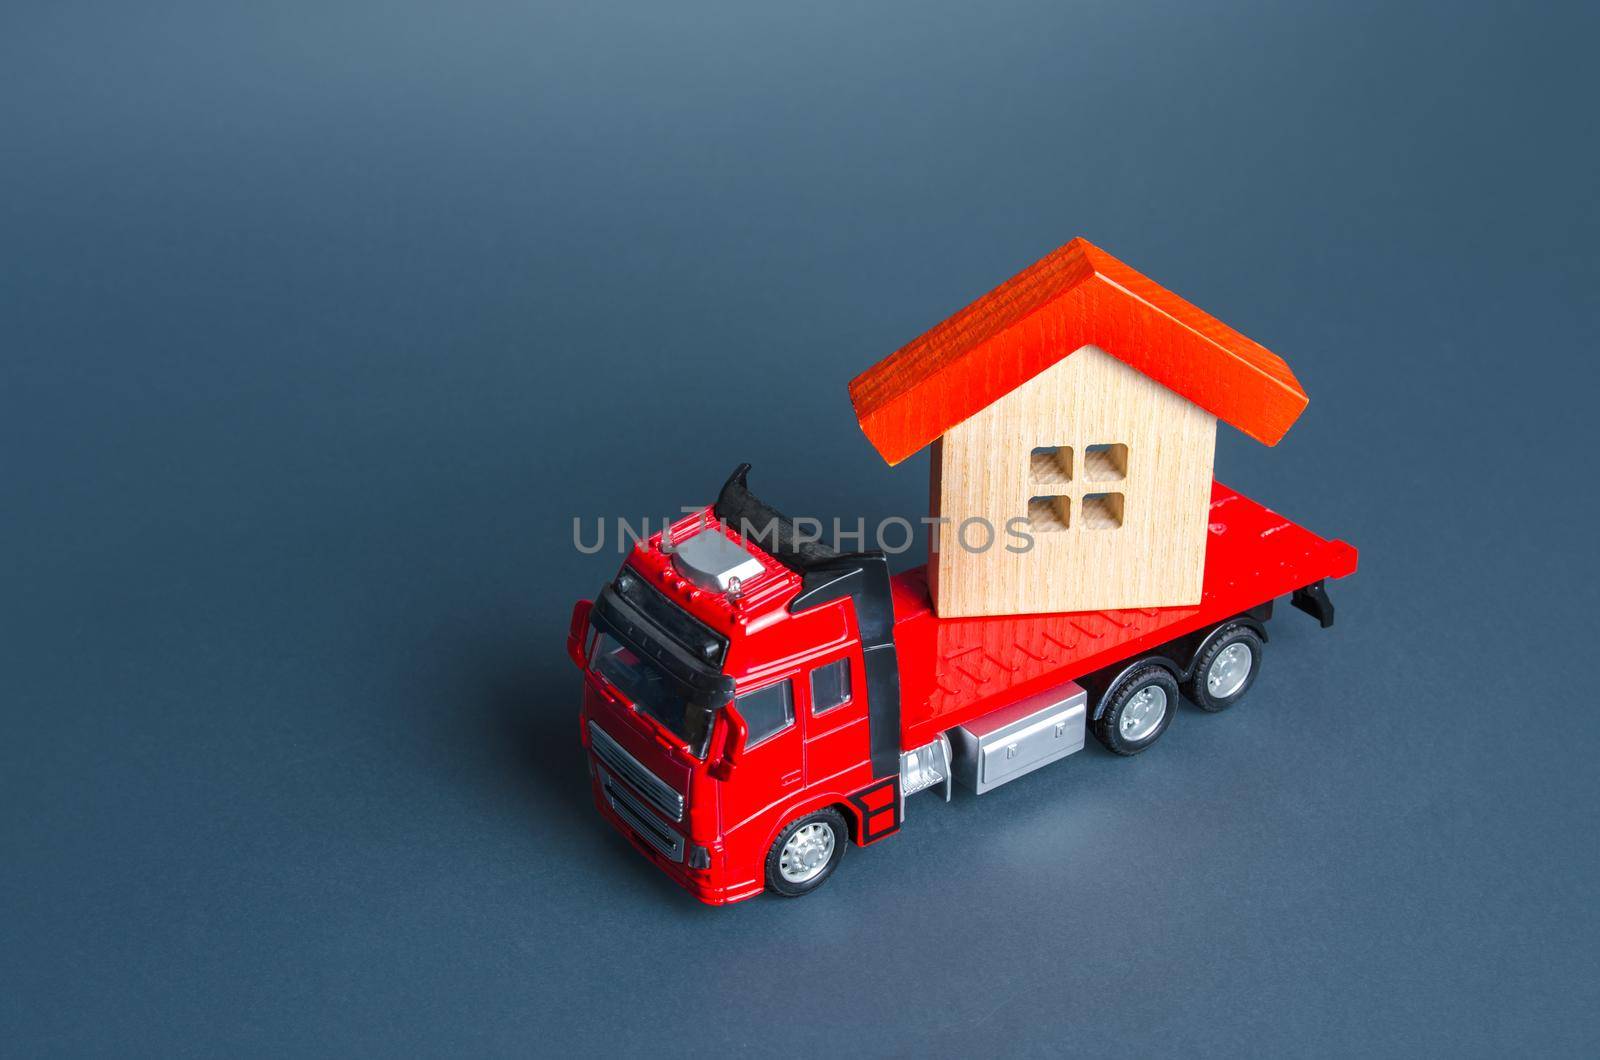 Truck transporting a house. Delivery services to another house. A moving company. Transportation of real estate. Resettlement program for new housing. Construction industry. Building insurance.